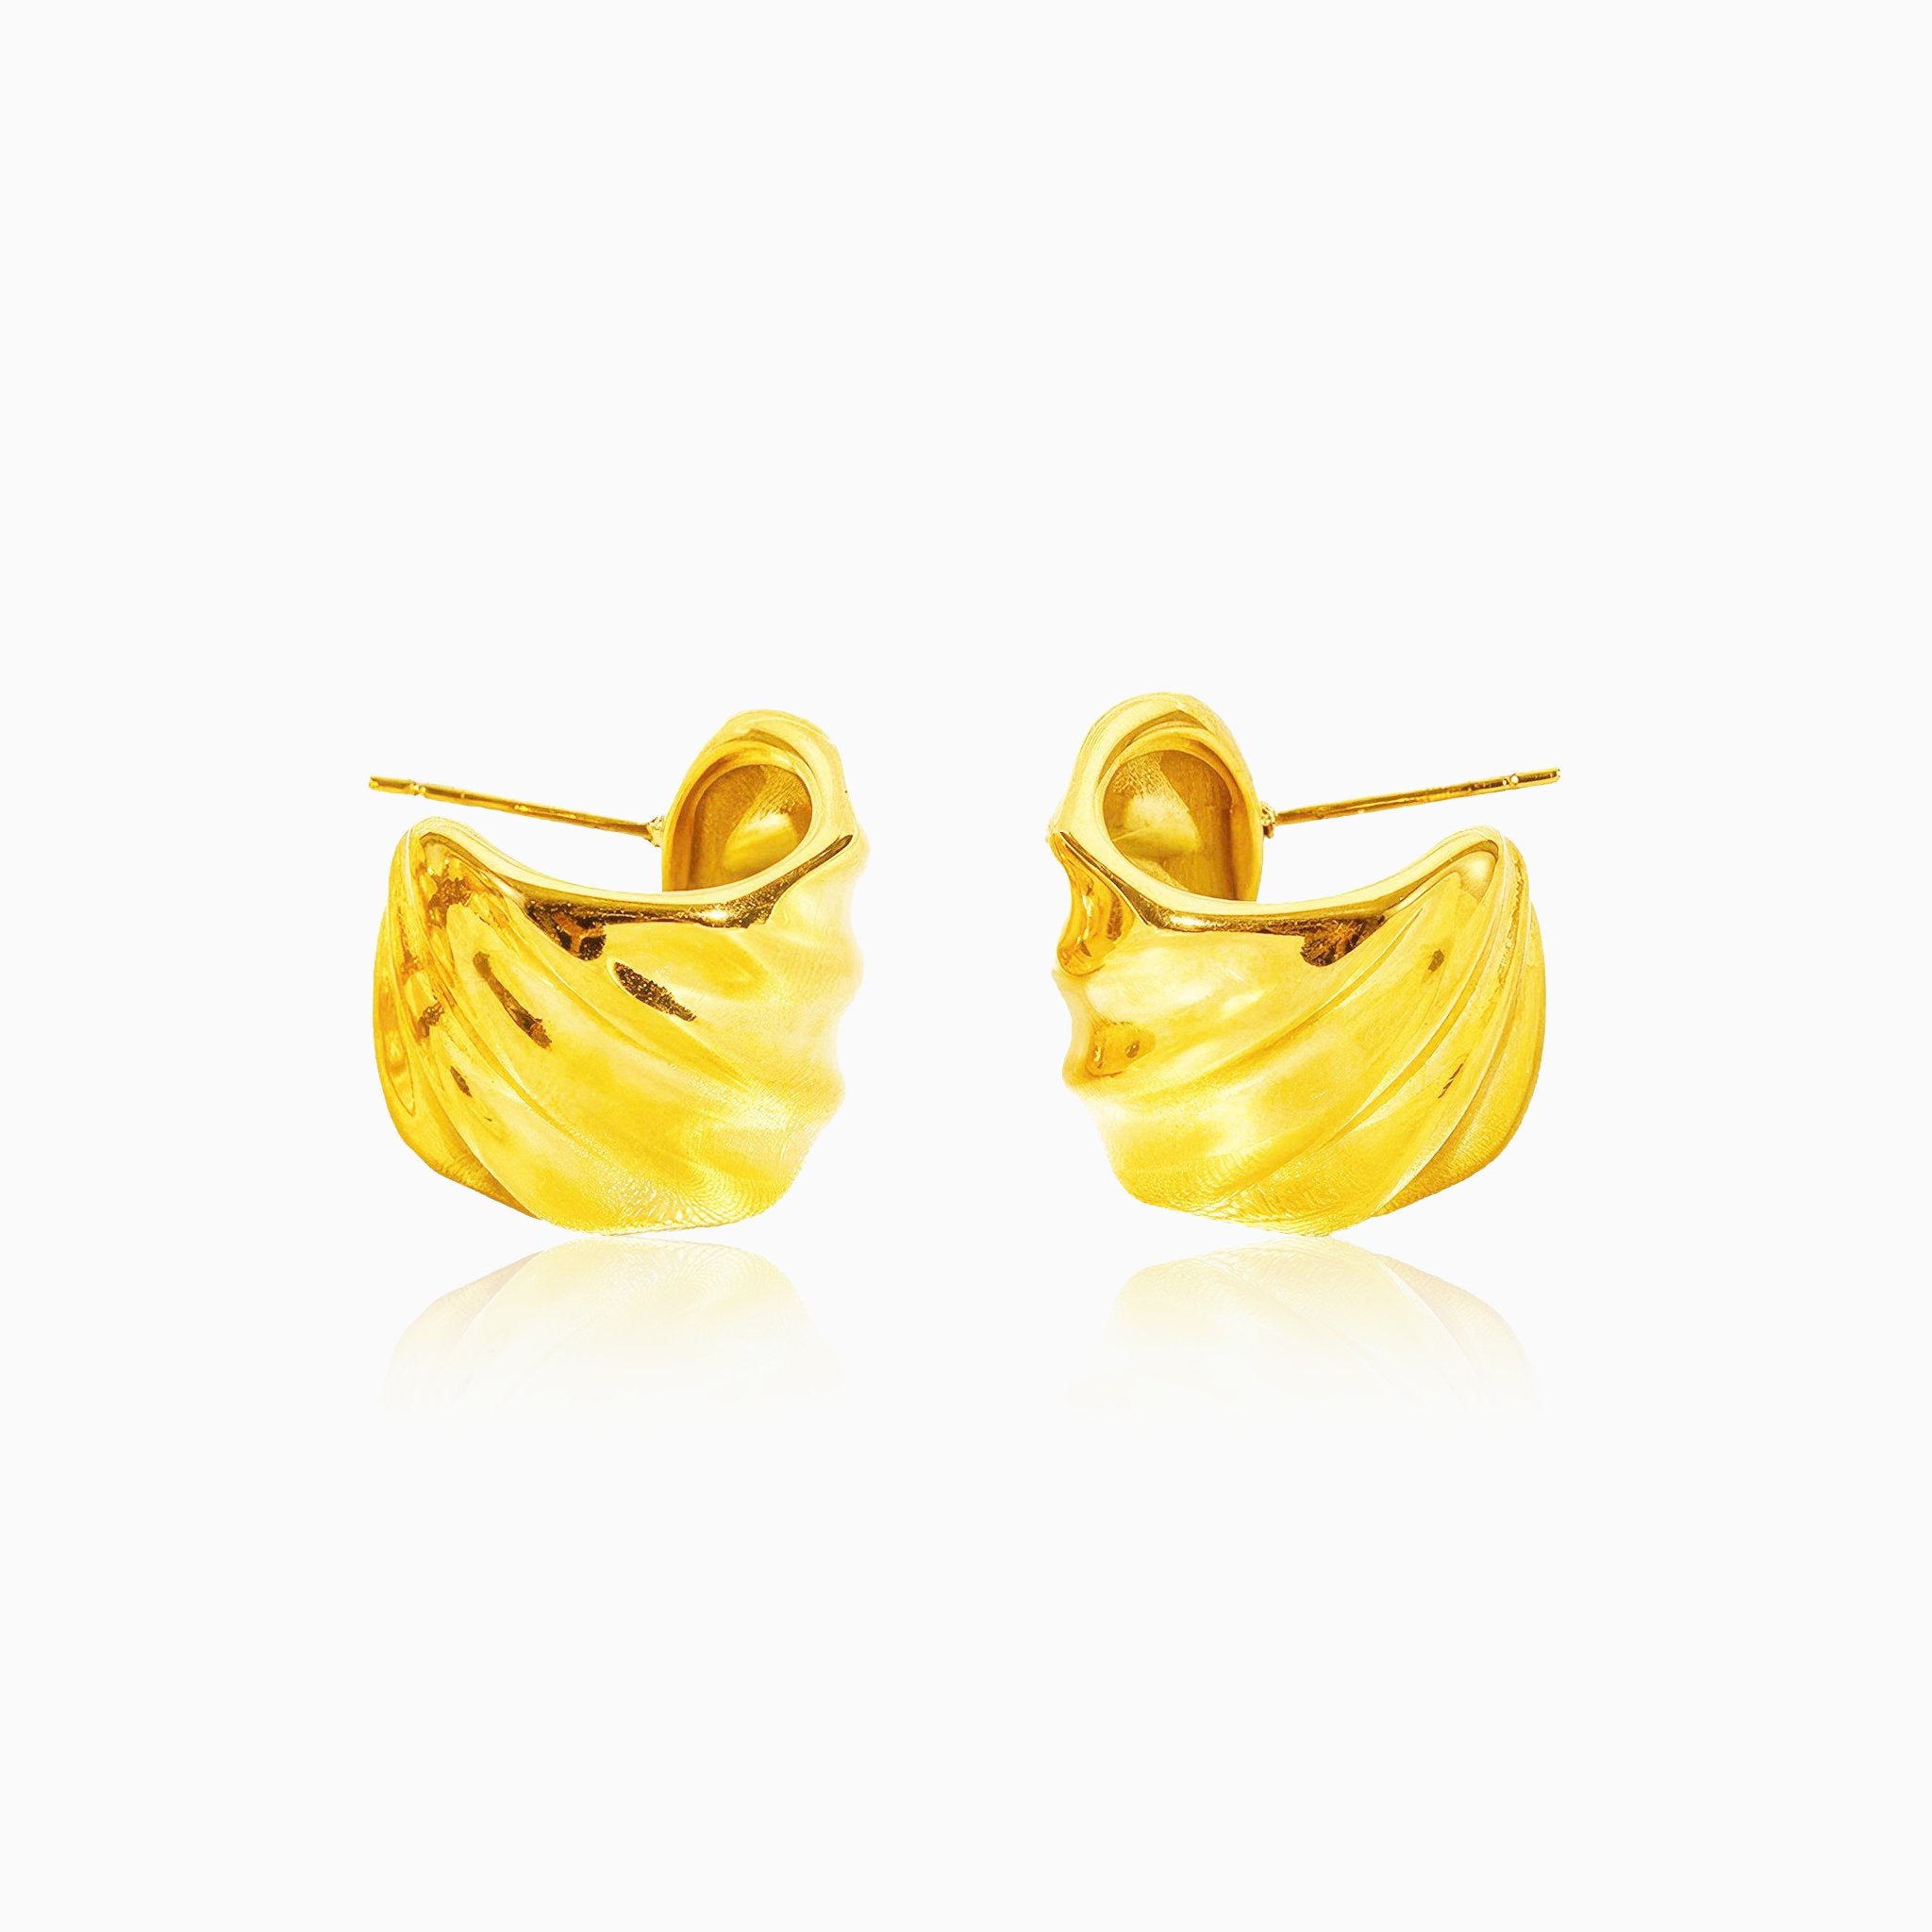 Threaded C-Shape Design Earrings - Nobbier - Earrings - 18K Gold And Titanium PVD Coated Jewelry